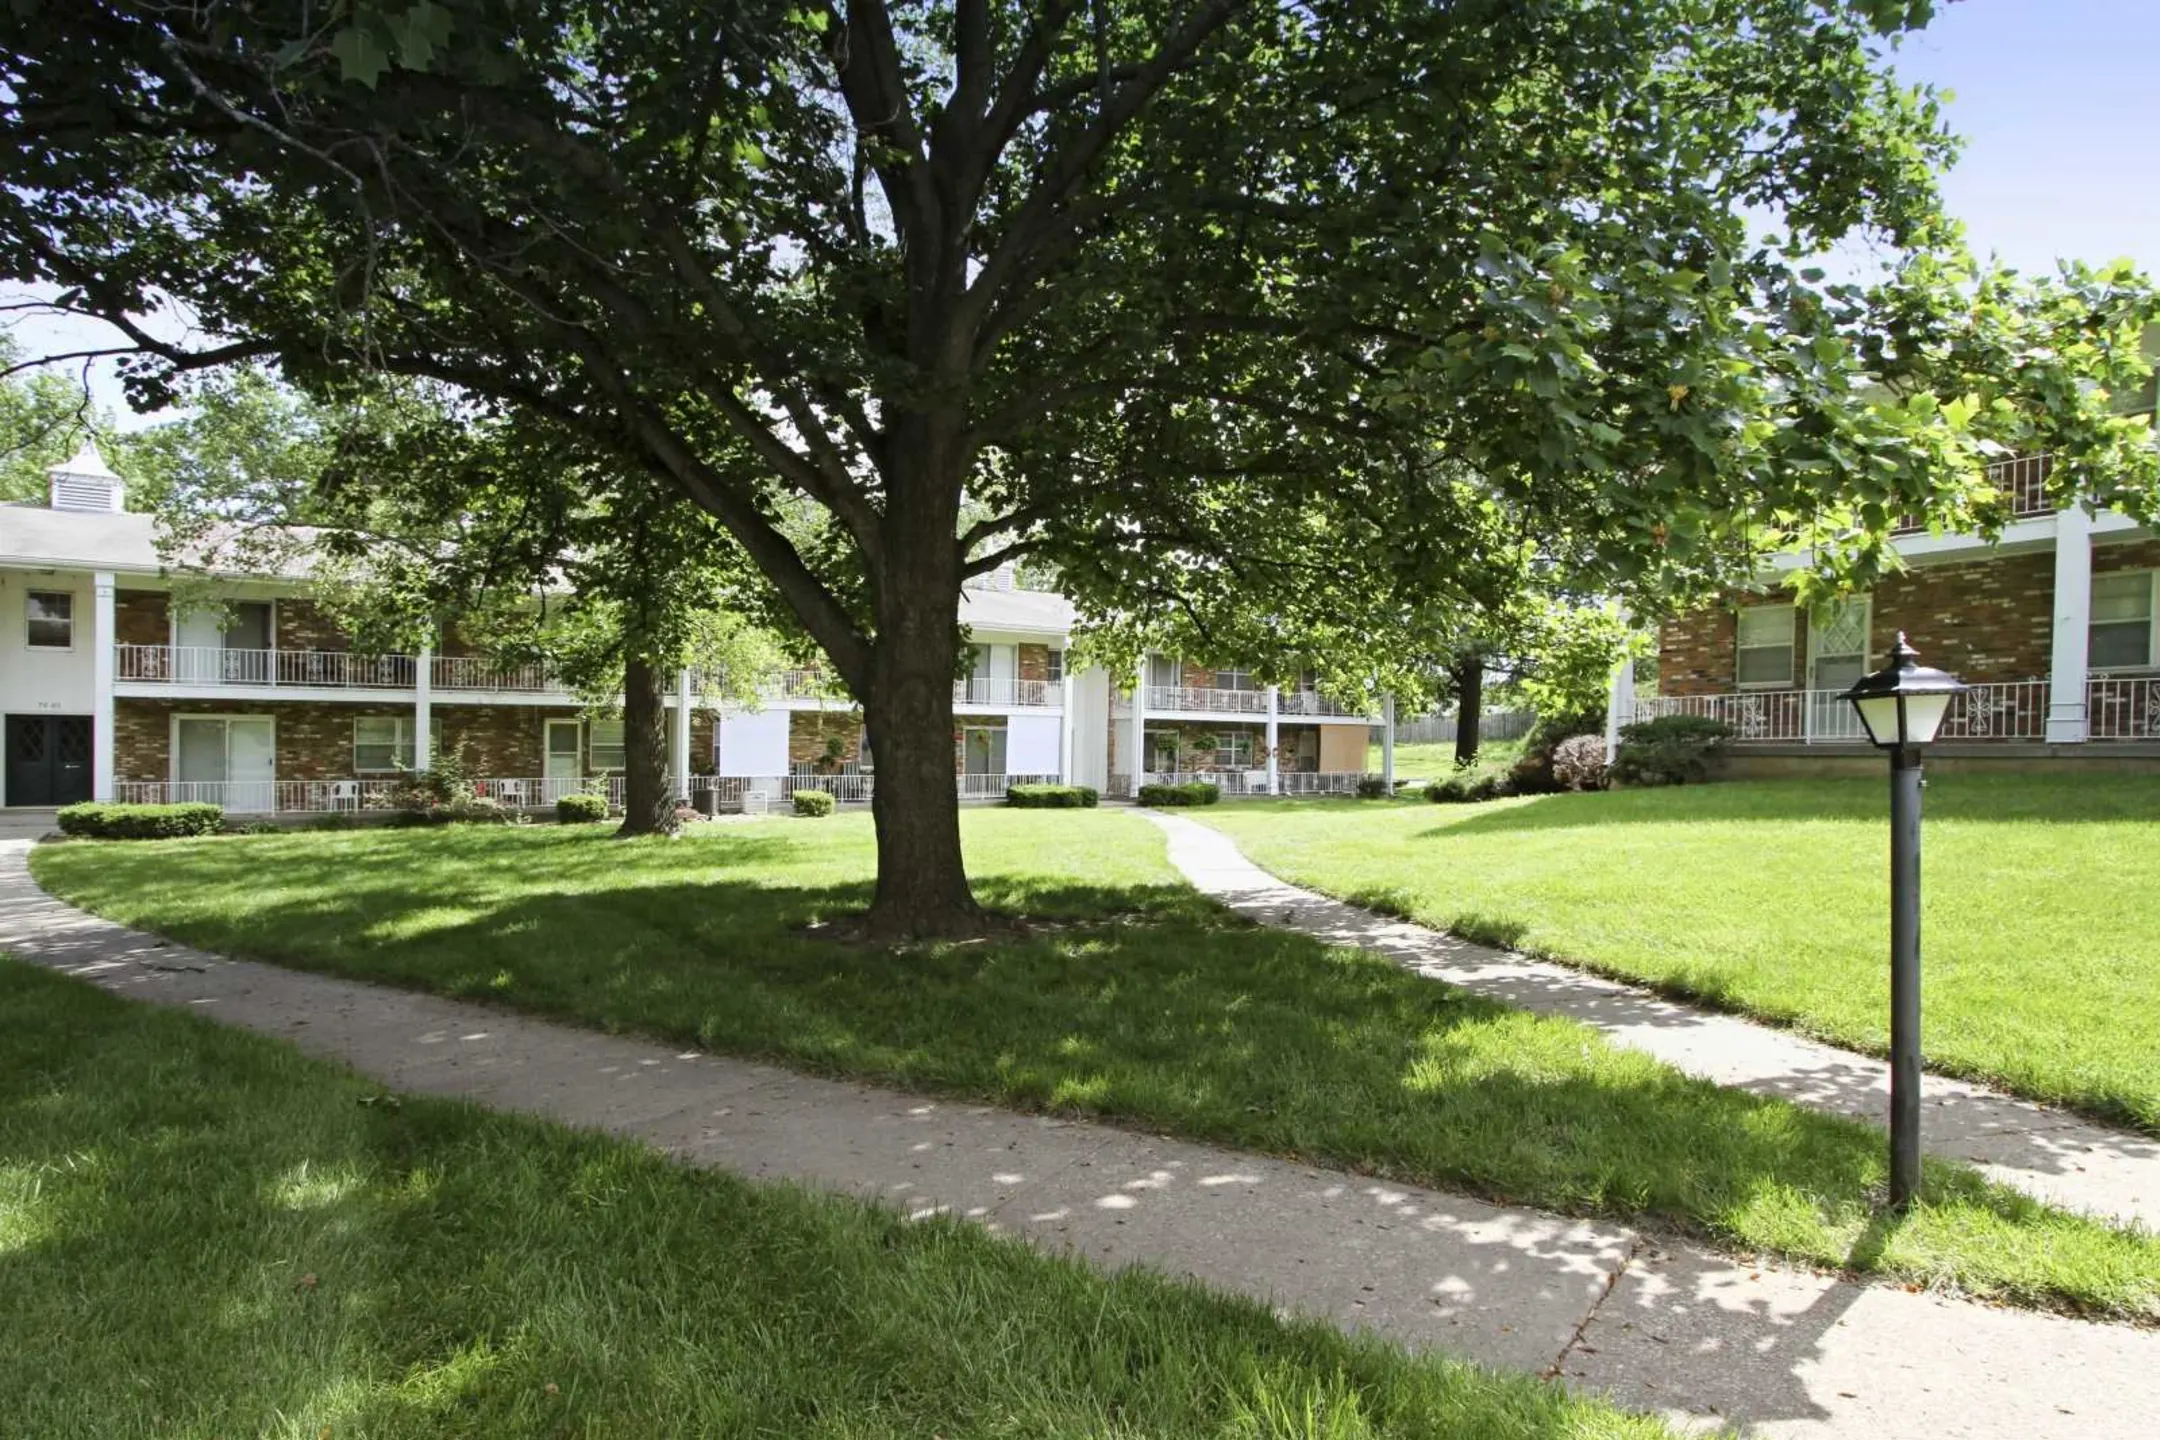 Building - Colonial Gardens & Cherbourg Apartments - Overland Park, KS